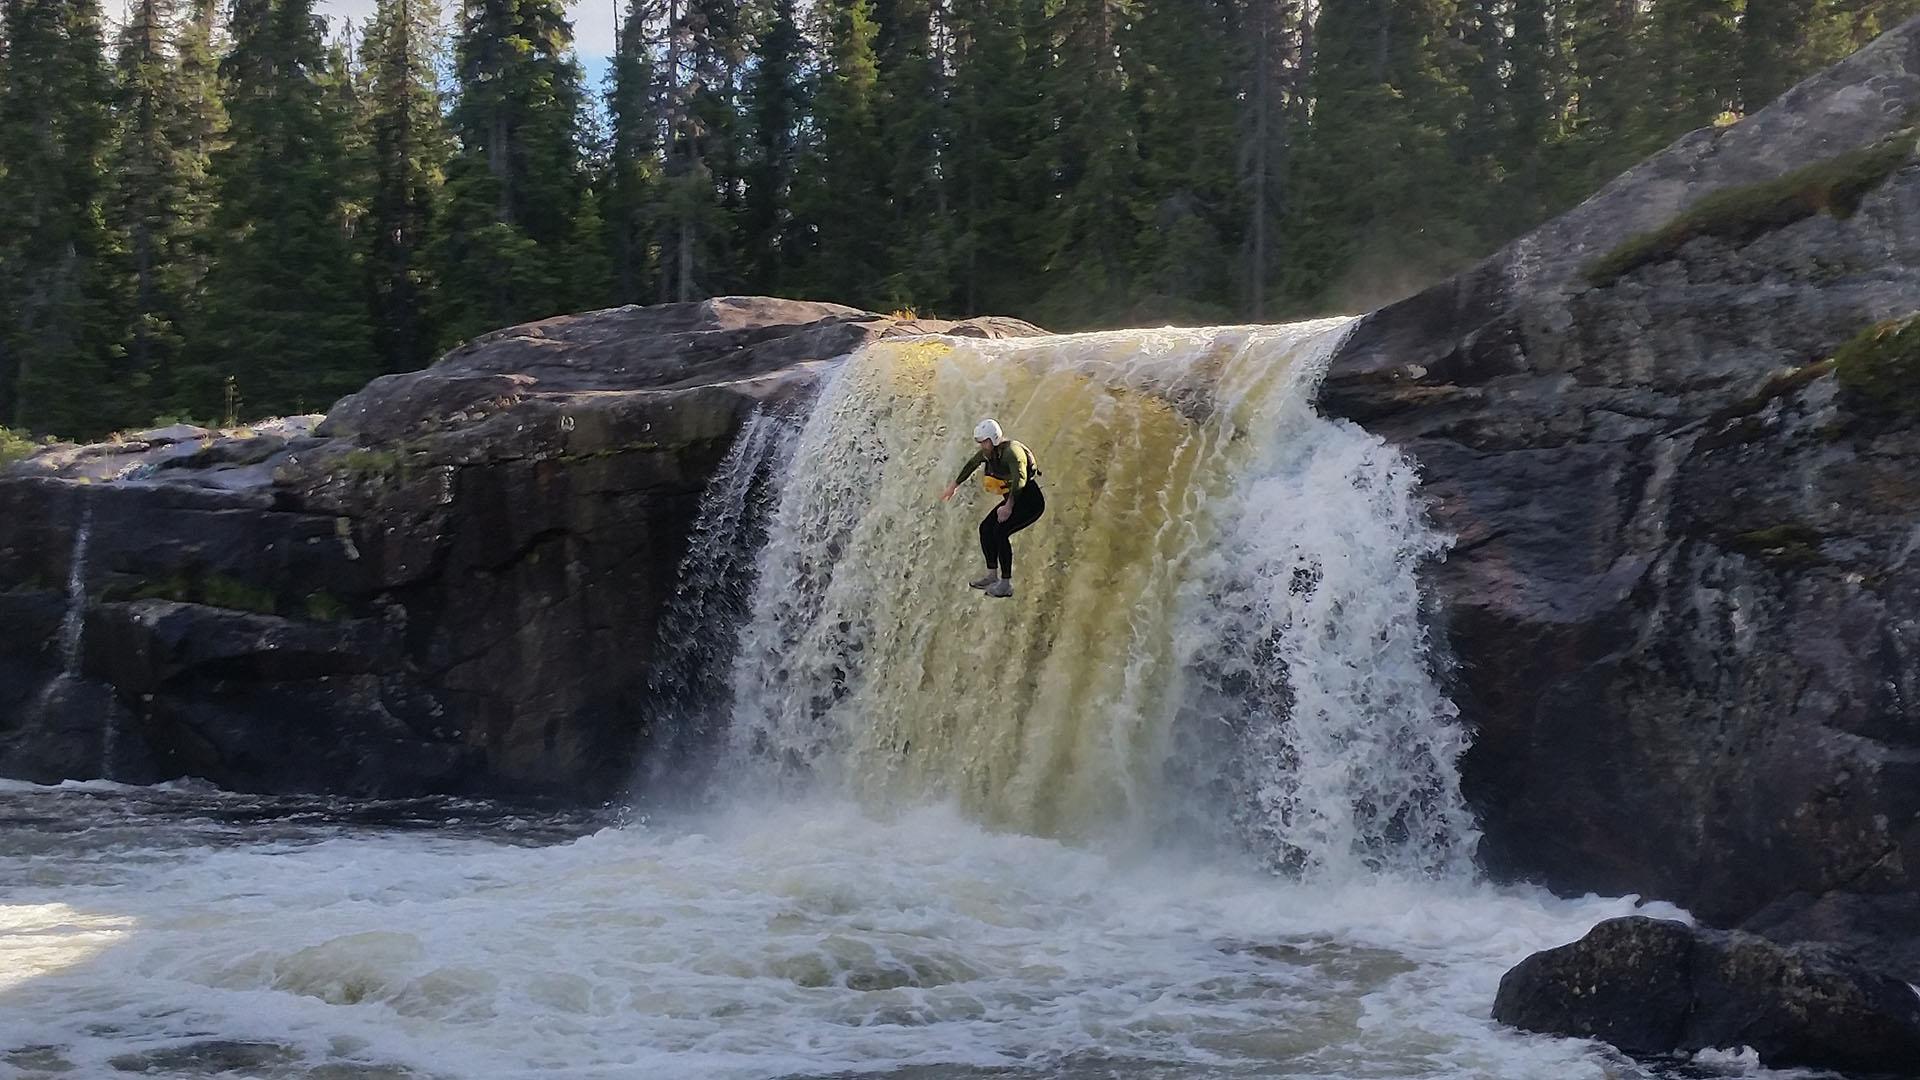 A man in wetsuit and helmet jumps down a waterfall in a river.